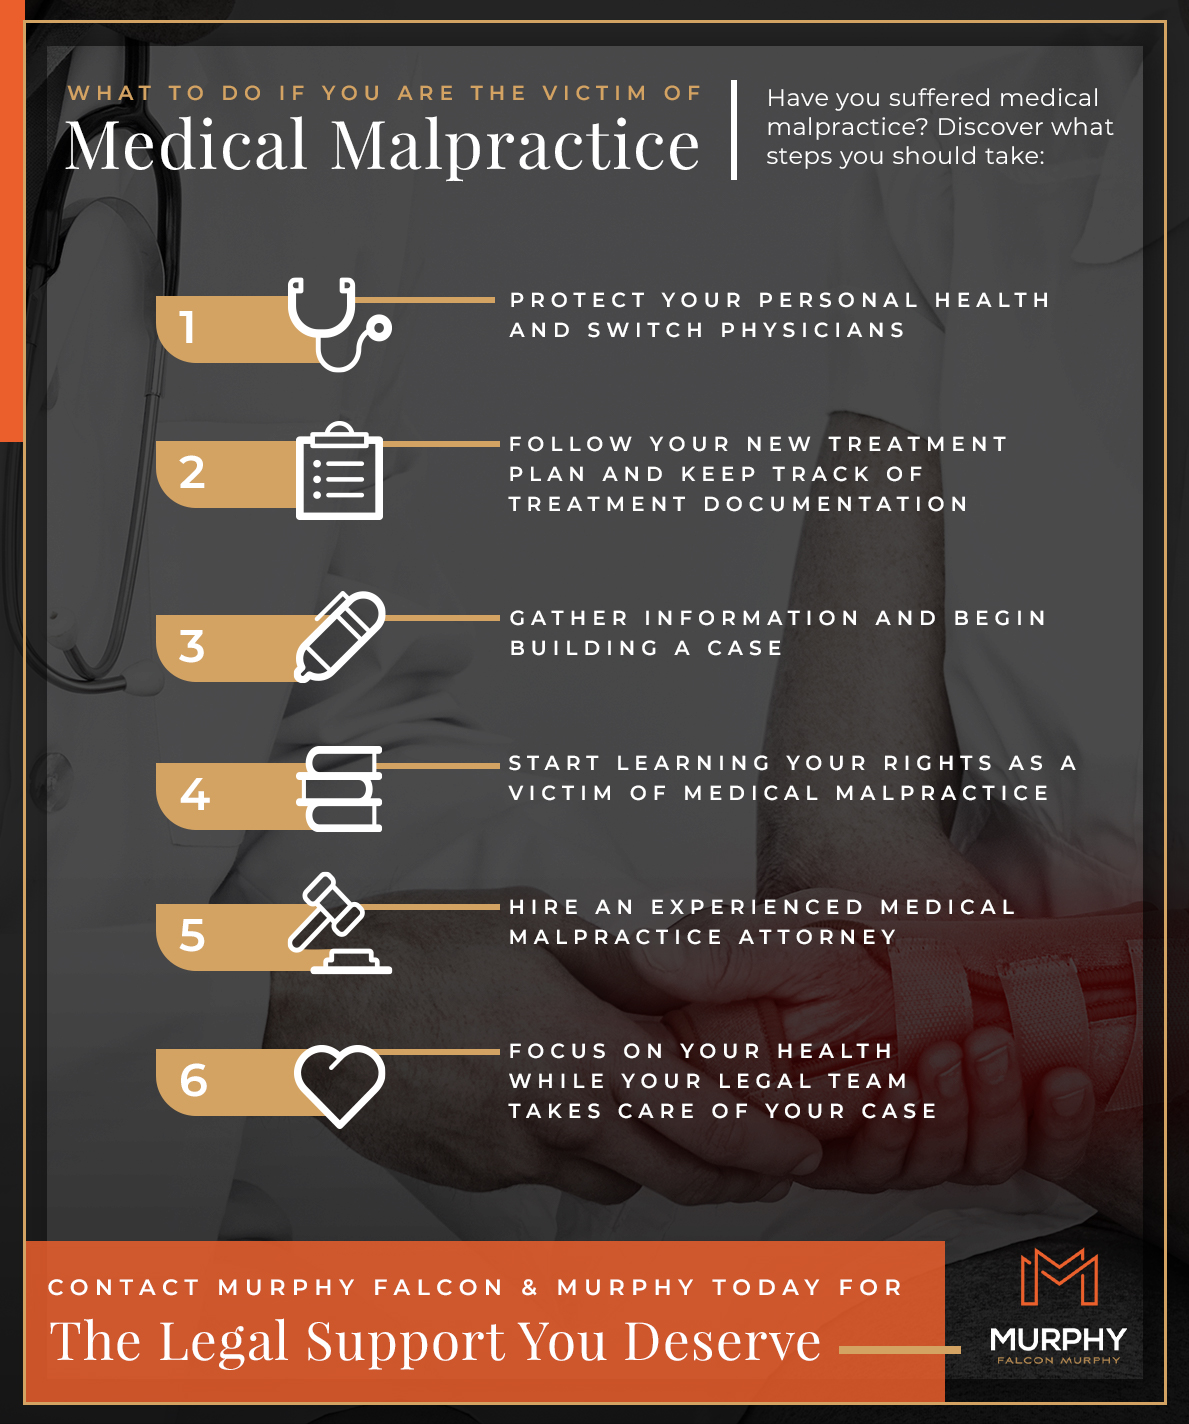 What To Do If You Are The Victim Of Medical Malpractice